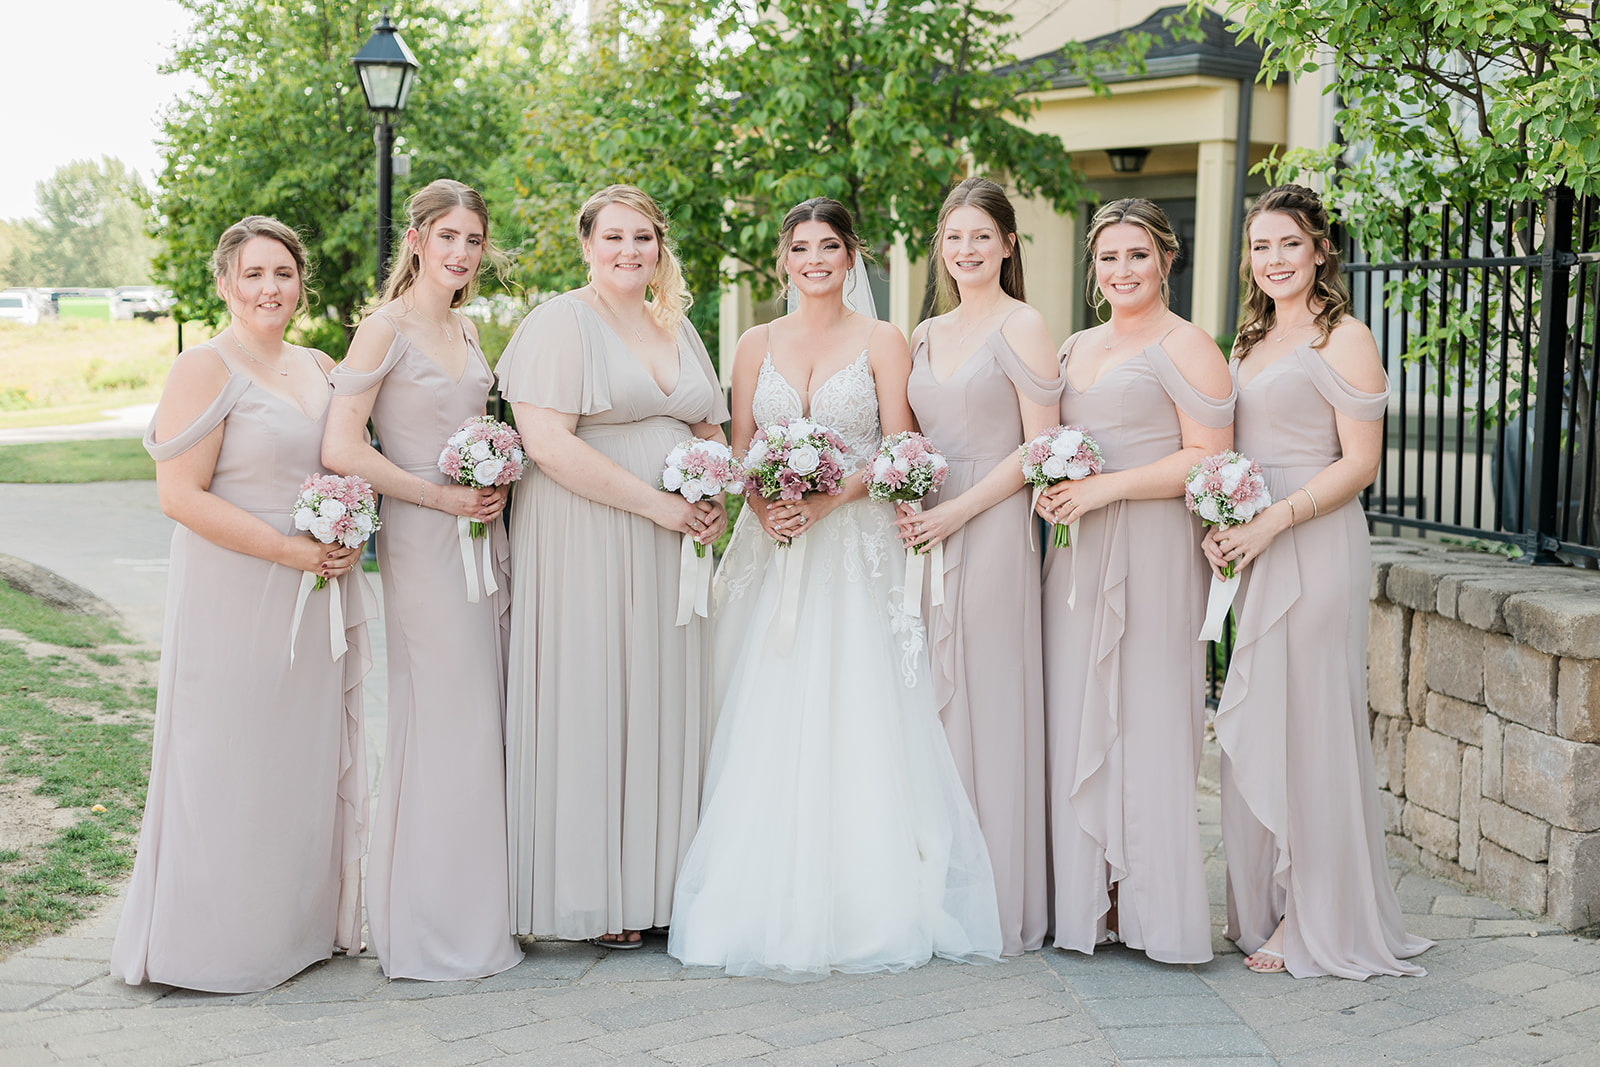 Bride and bridesmaids all lined up in a row with bouquets